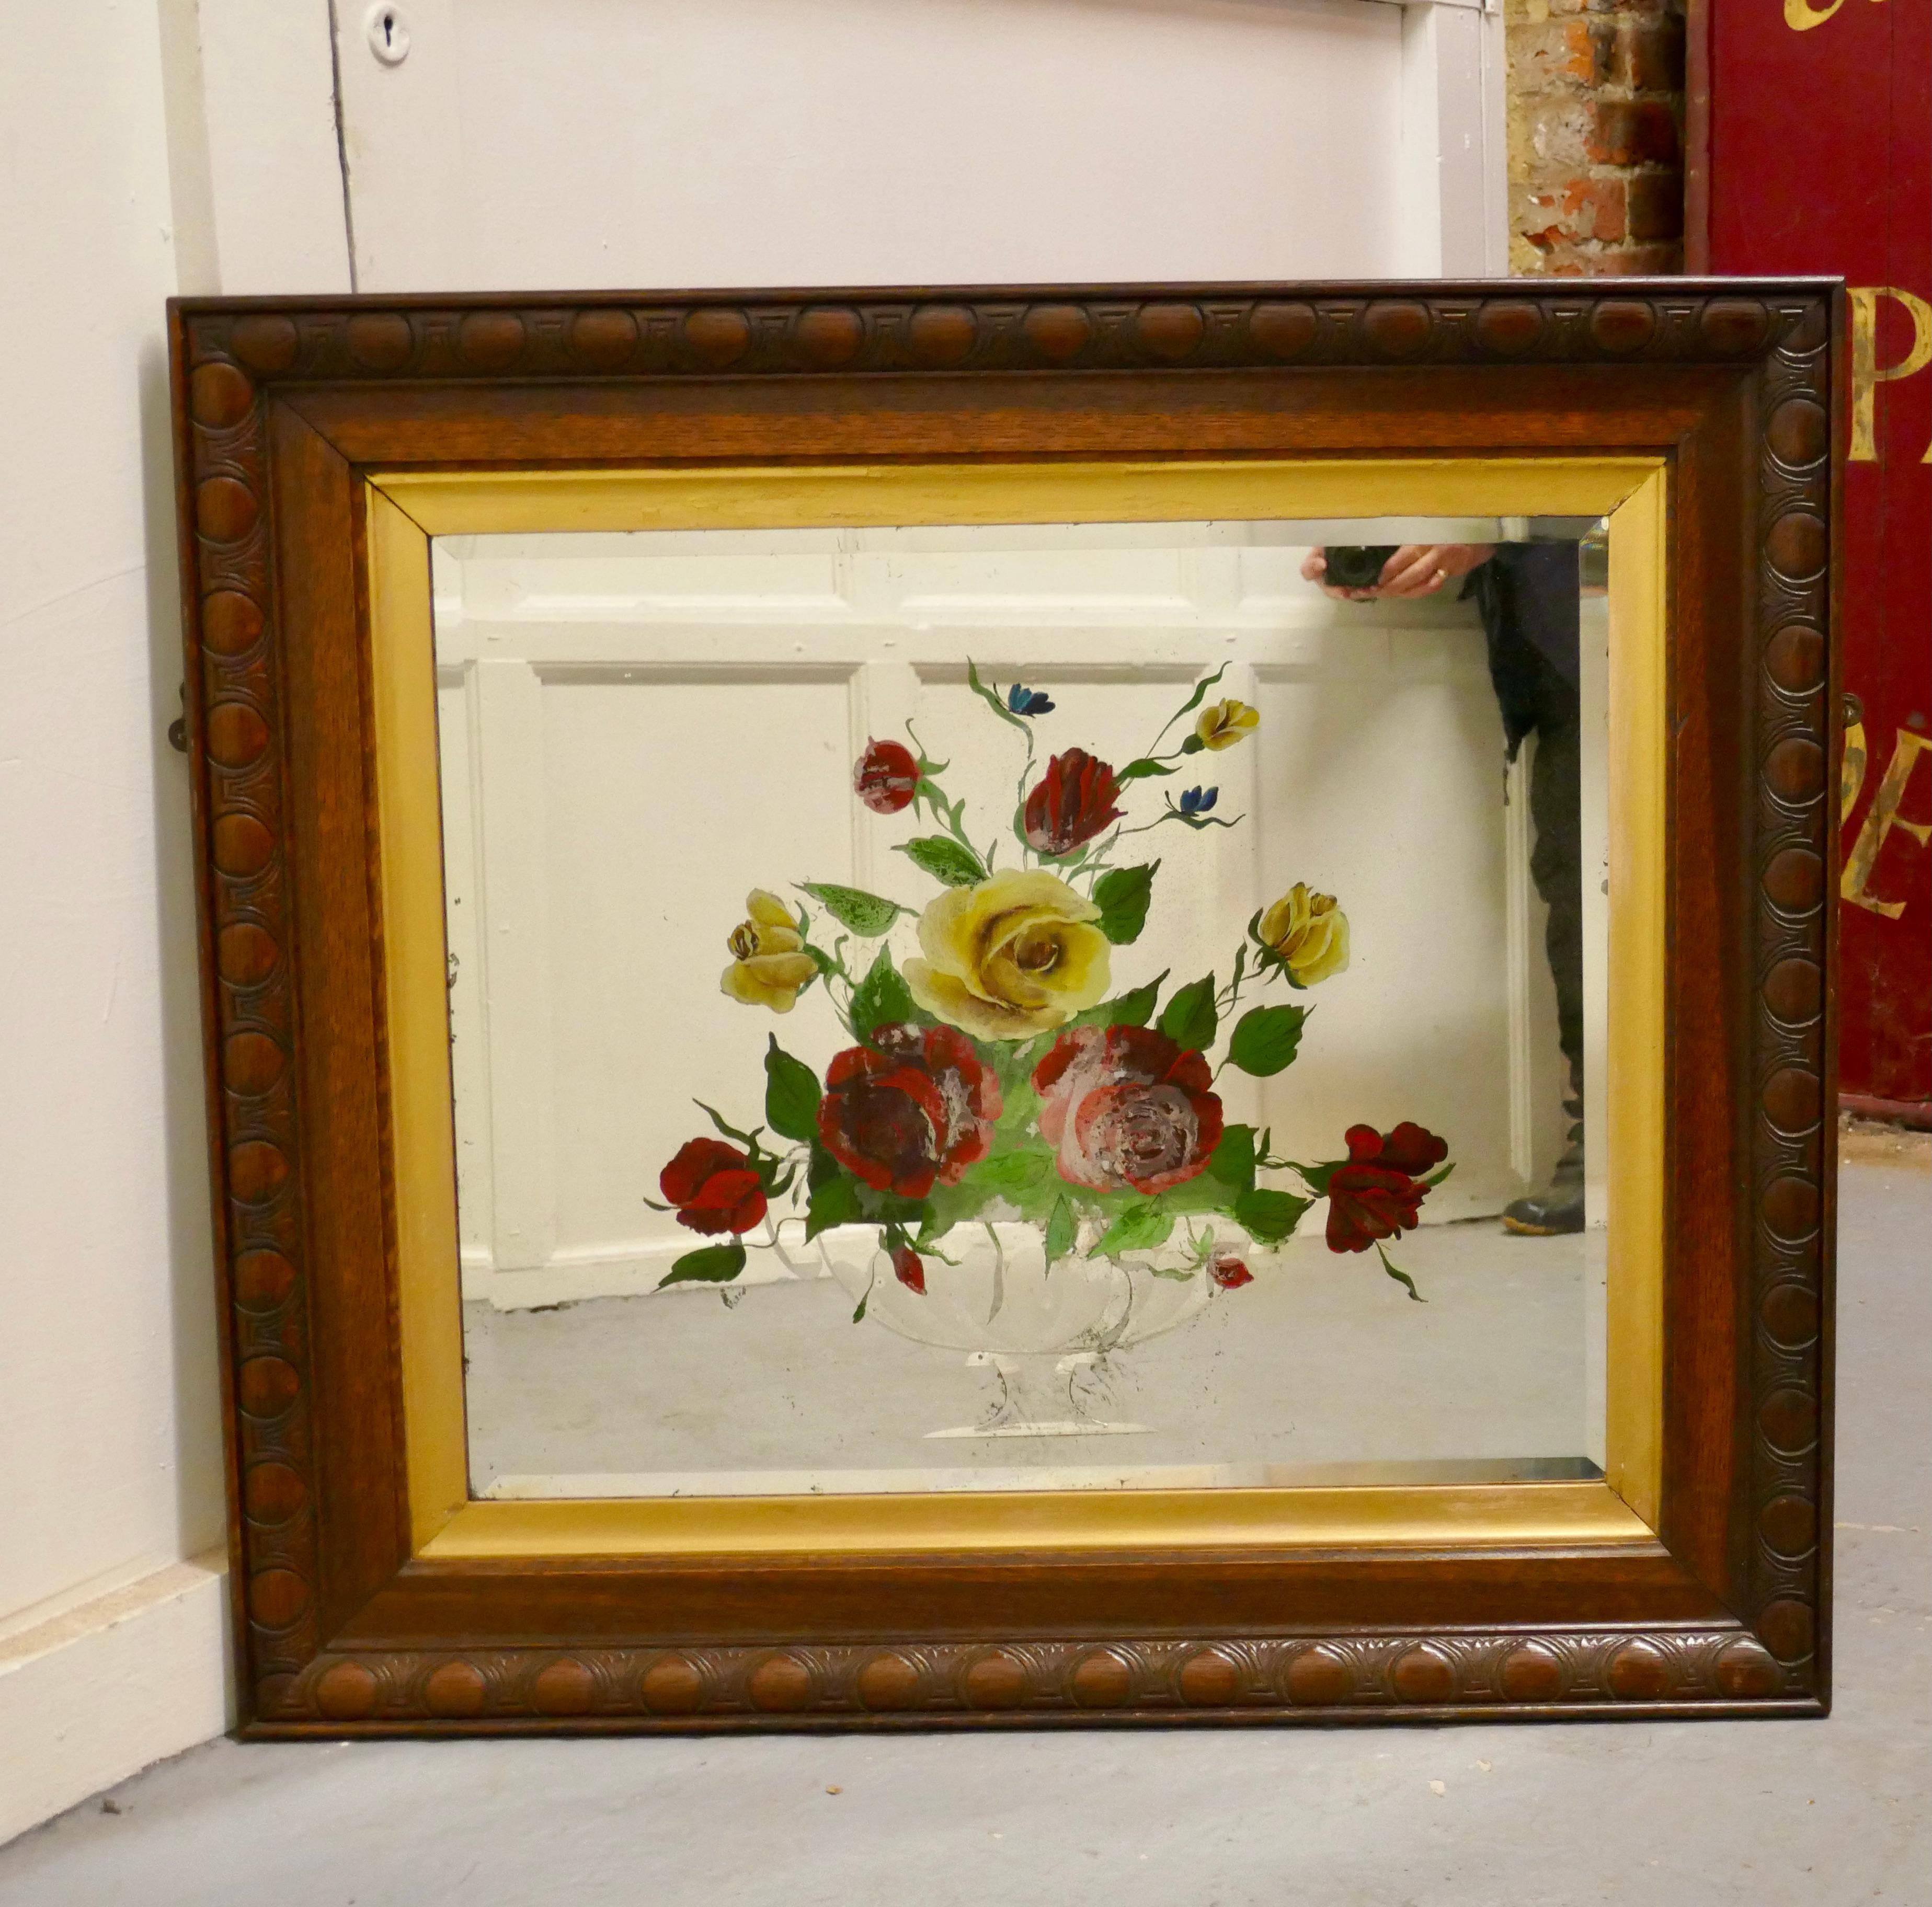 Victorian reverse painted mirror, decorated with roses

The Bevelled mirror is painted from the reverse side with large colourful bold floral decoration set in an urn, it is set on a Carved Oak frame with a gold mount
The mirror is in good sound